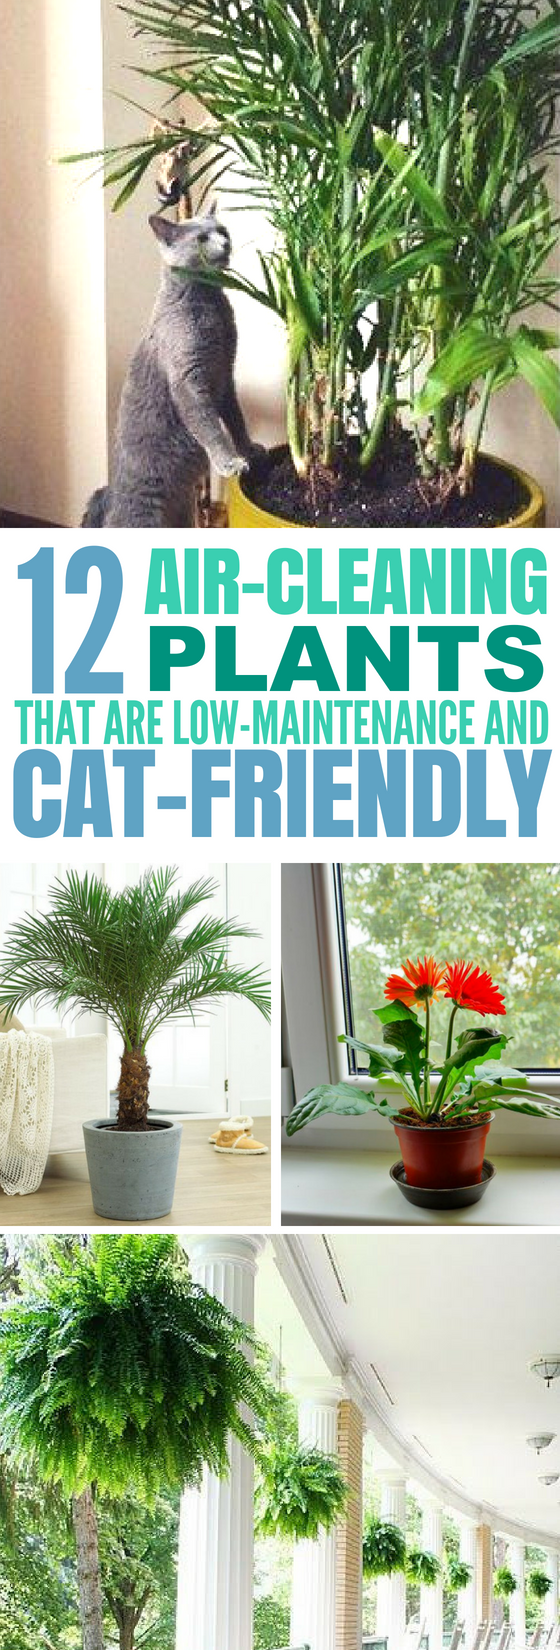 12 Common House Plants That Filter Your Air All Day -   16 plants Decor cats ideas